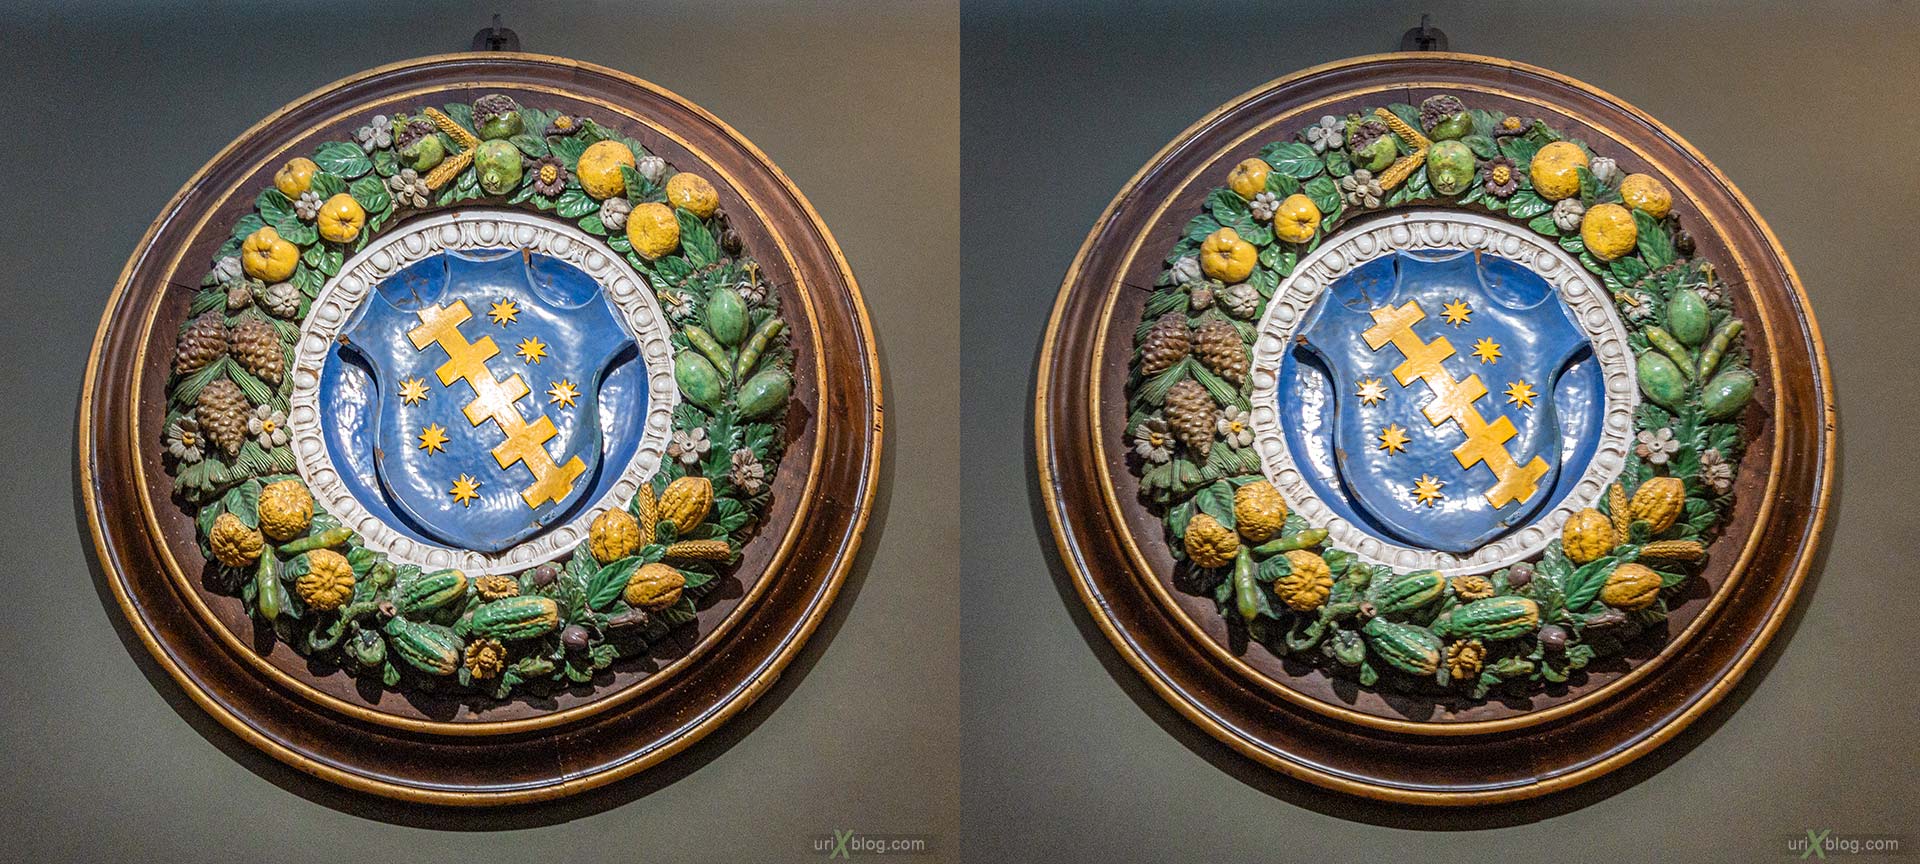 coat of arms, crest, glazed terracotta, tondo, garland, Uffizi Gallery, Contini Bonacossi Collection, Benedetto Buglioni, Florence, Firenze, Italy, 3D, stereo pair, cross-eyed, crossview, cross view stereo pair, stereoscopic